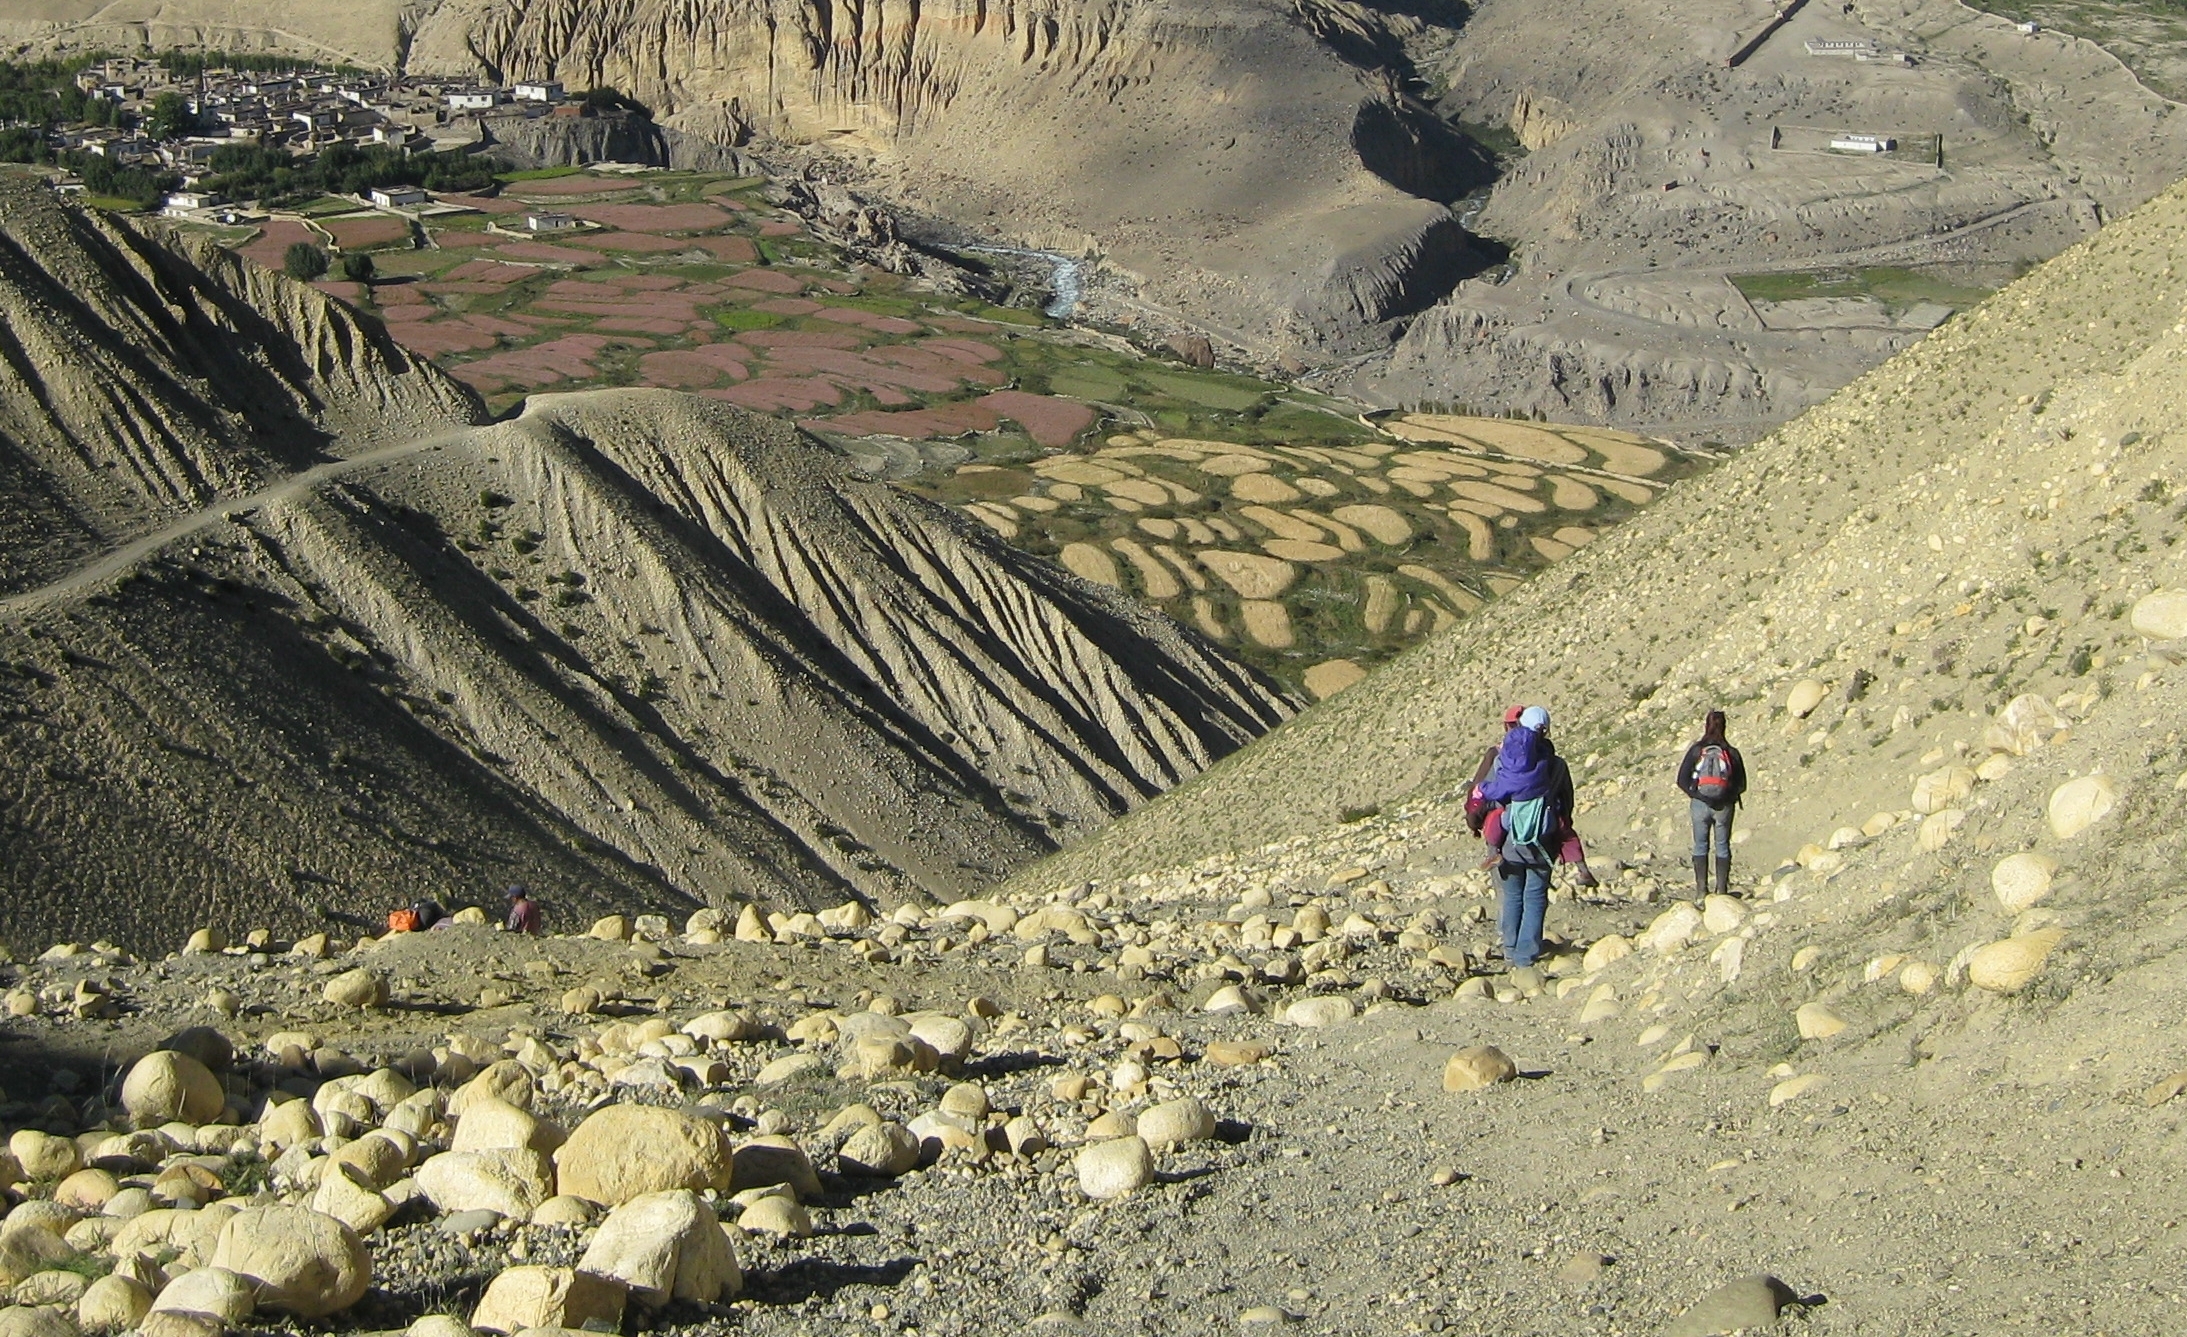 Dr. Sienna Craig, Aida and Drdak approaching the village of Ghemi in Upper Mustang, 2008.